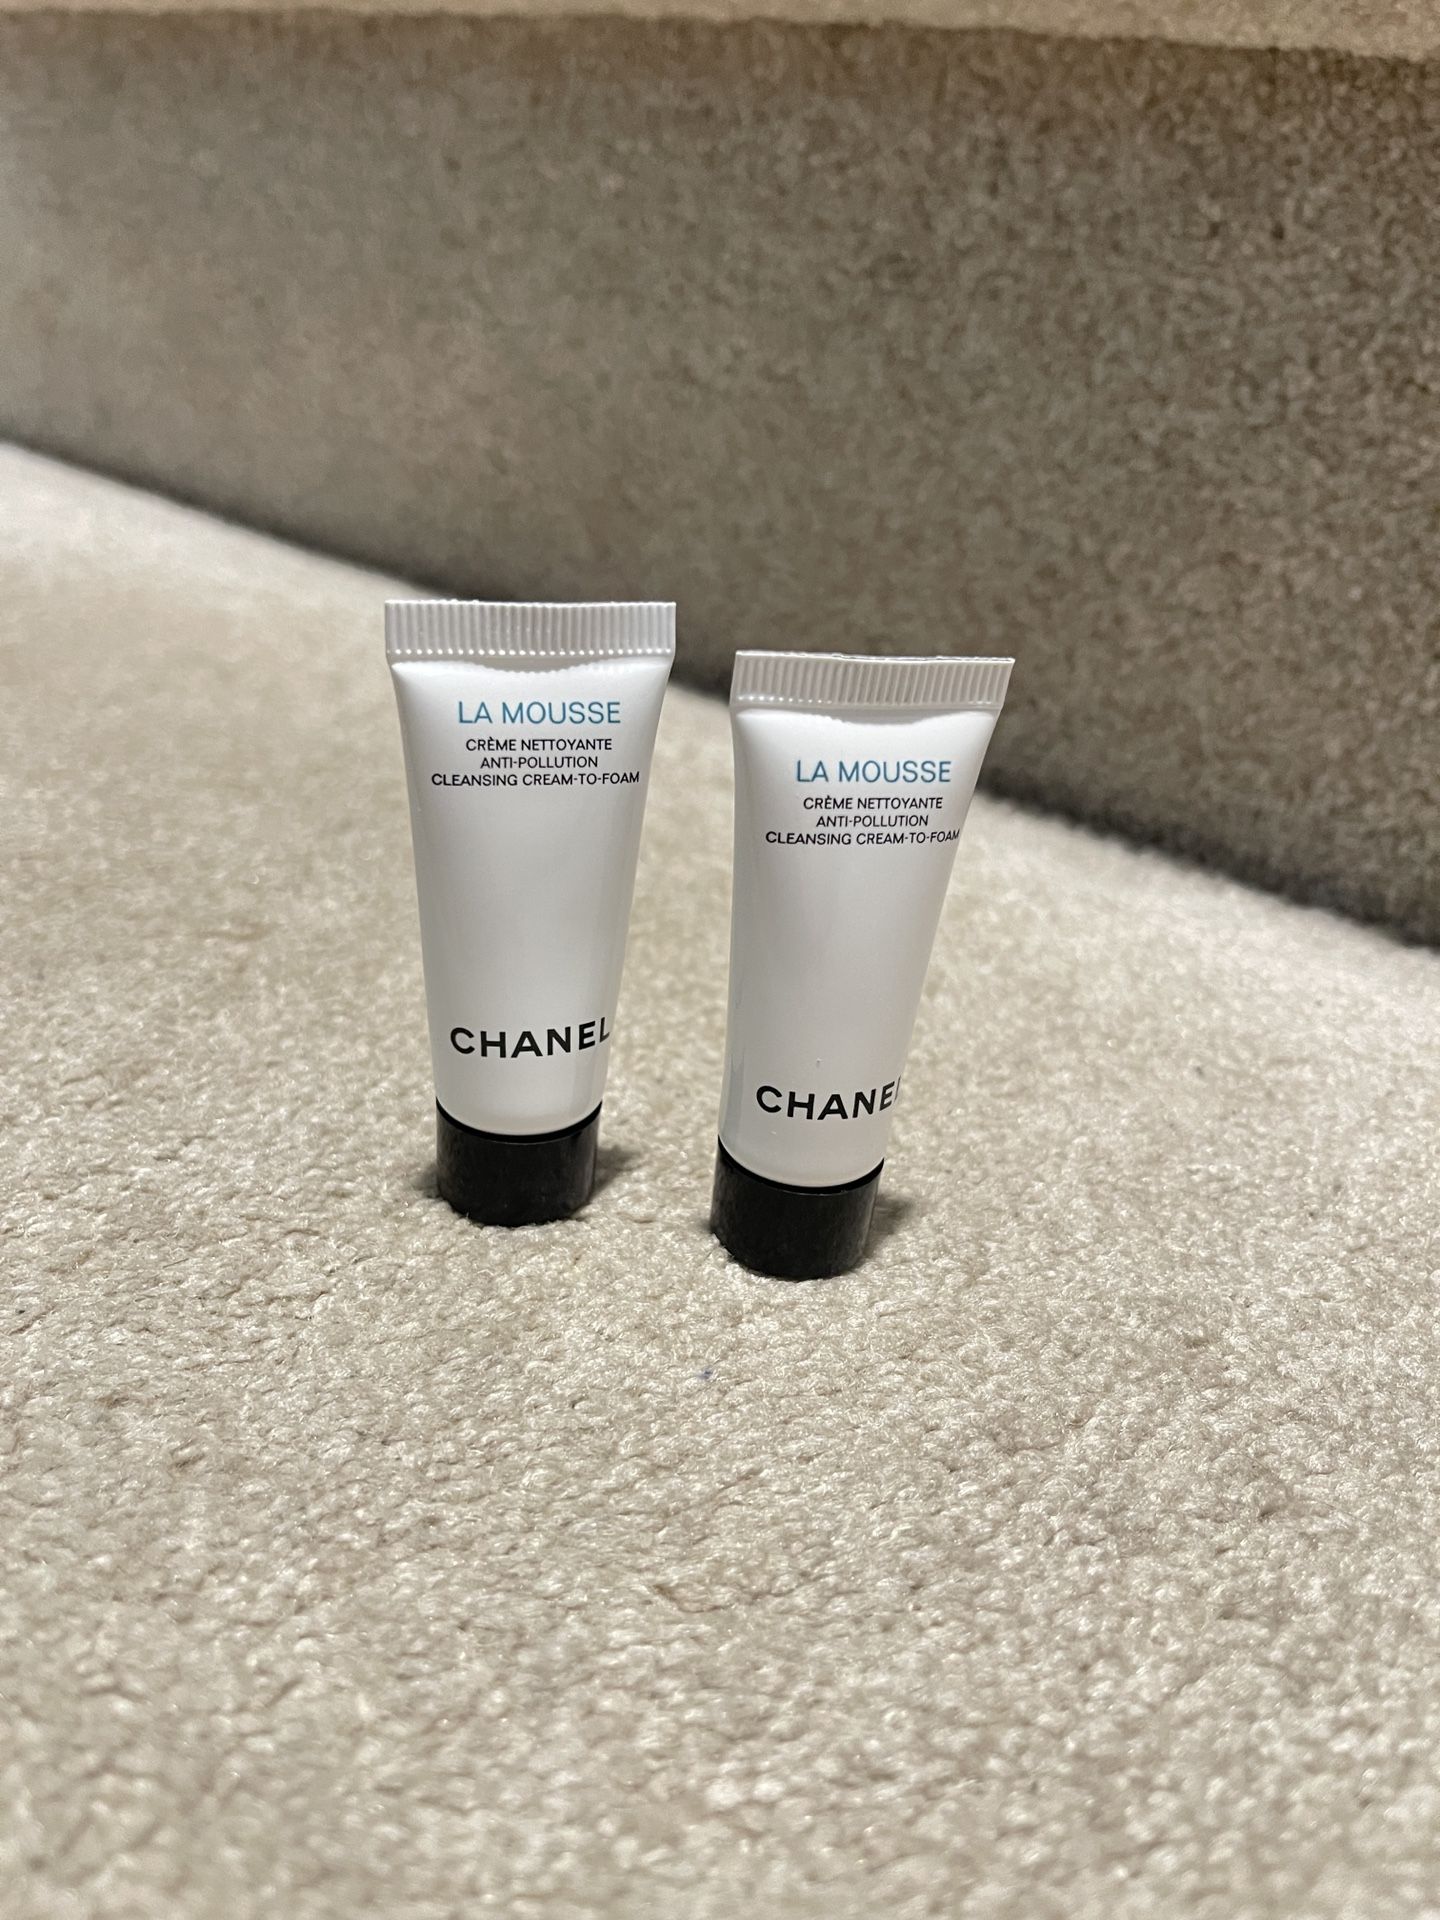 Chanel la mousse cleanser sample 5ml*2 for Sale in Chantilly, VA - OfferUp